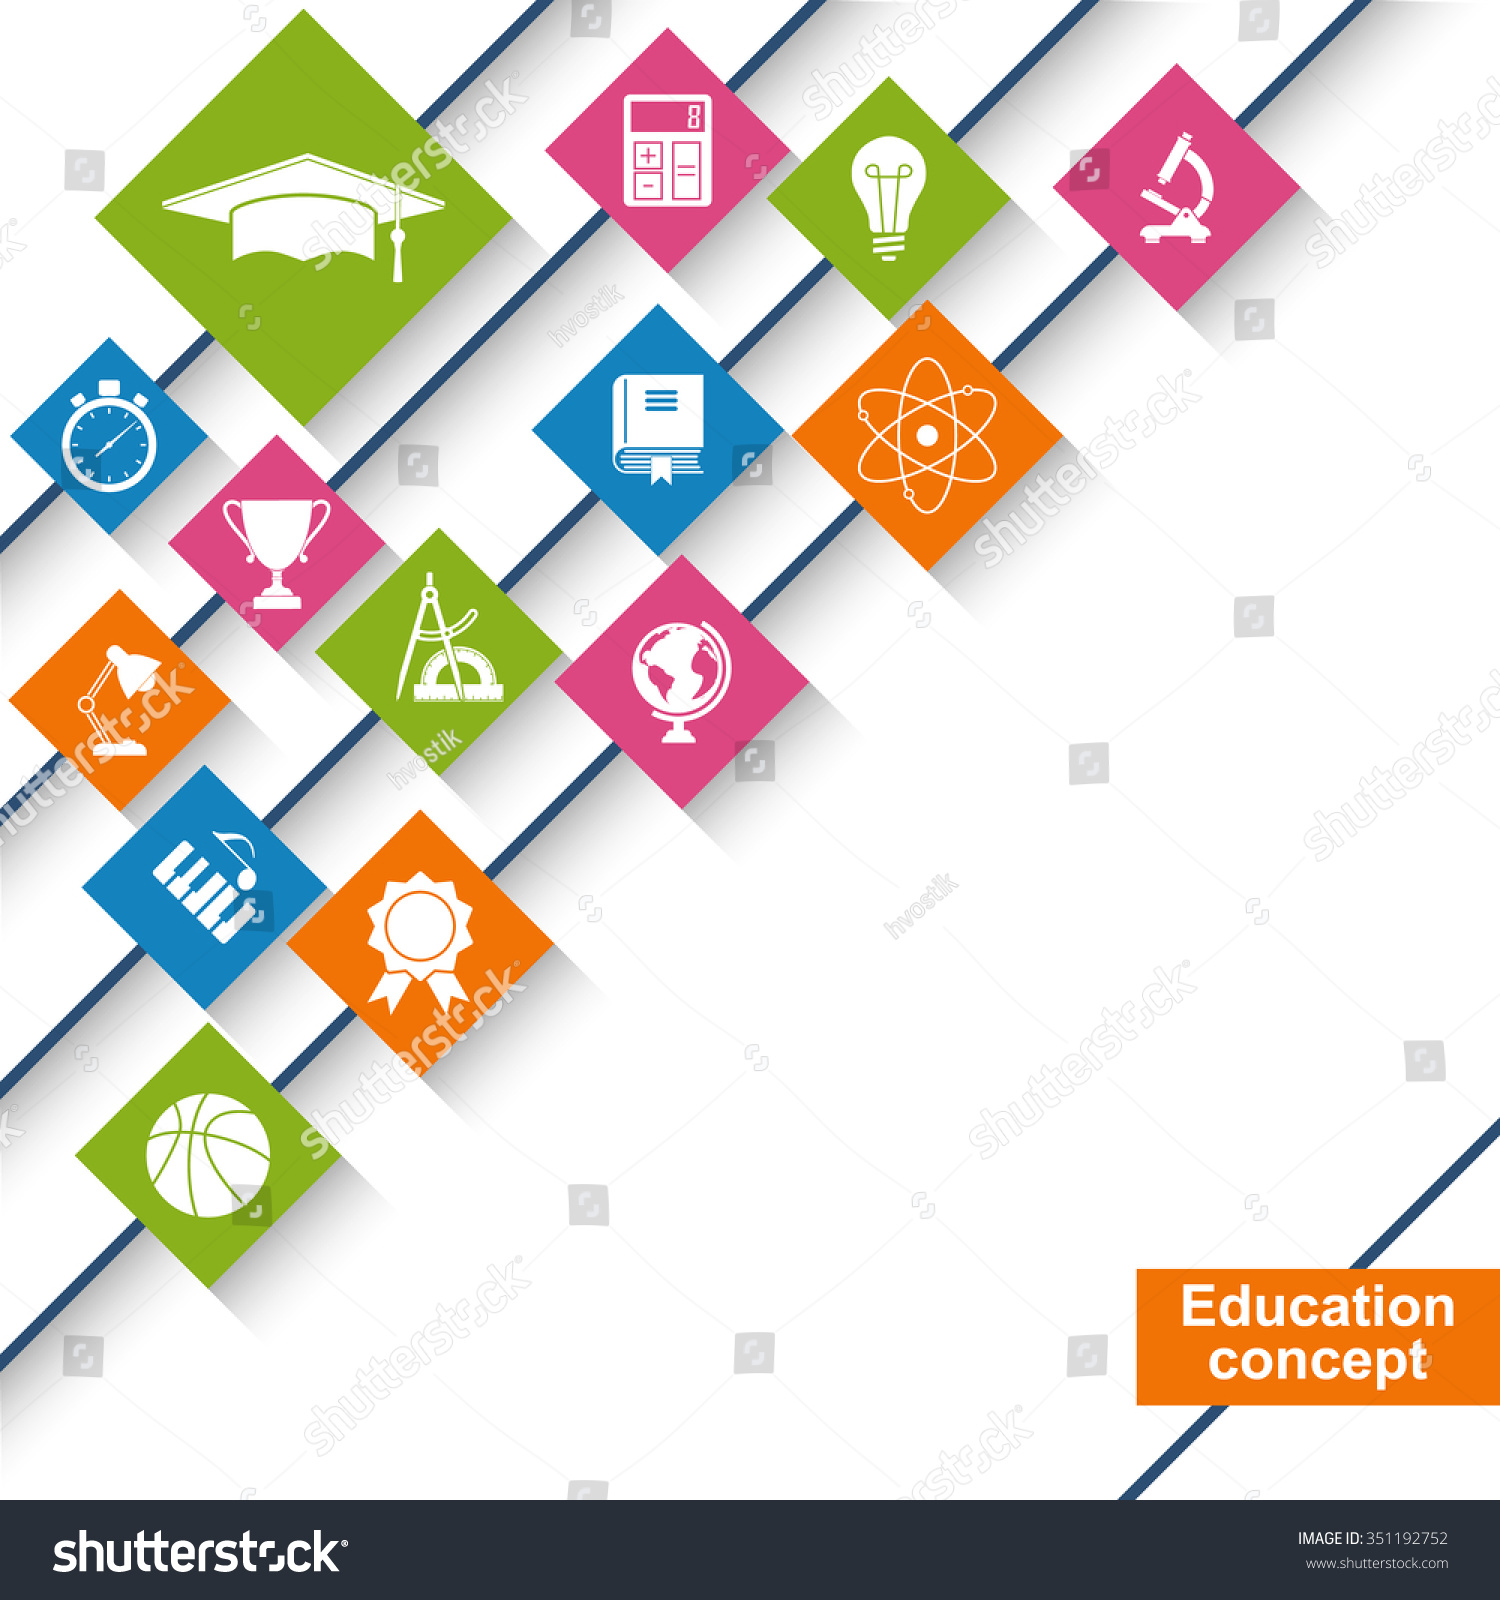 stock-vector-education-and-science-concept-abstract-education-background-with-icons-and-signs-vector-351192752.jpg